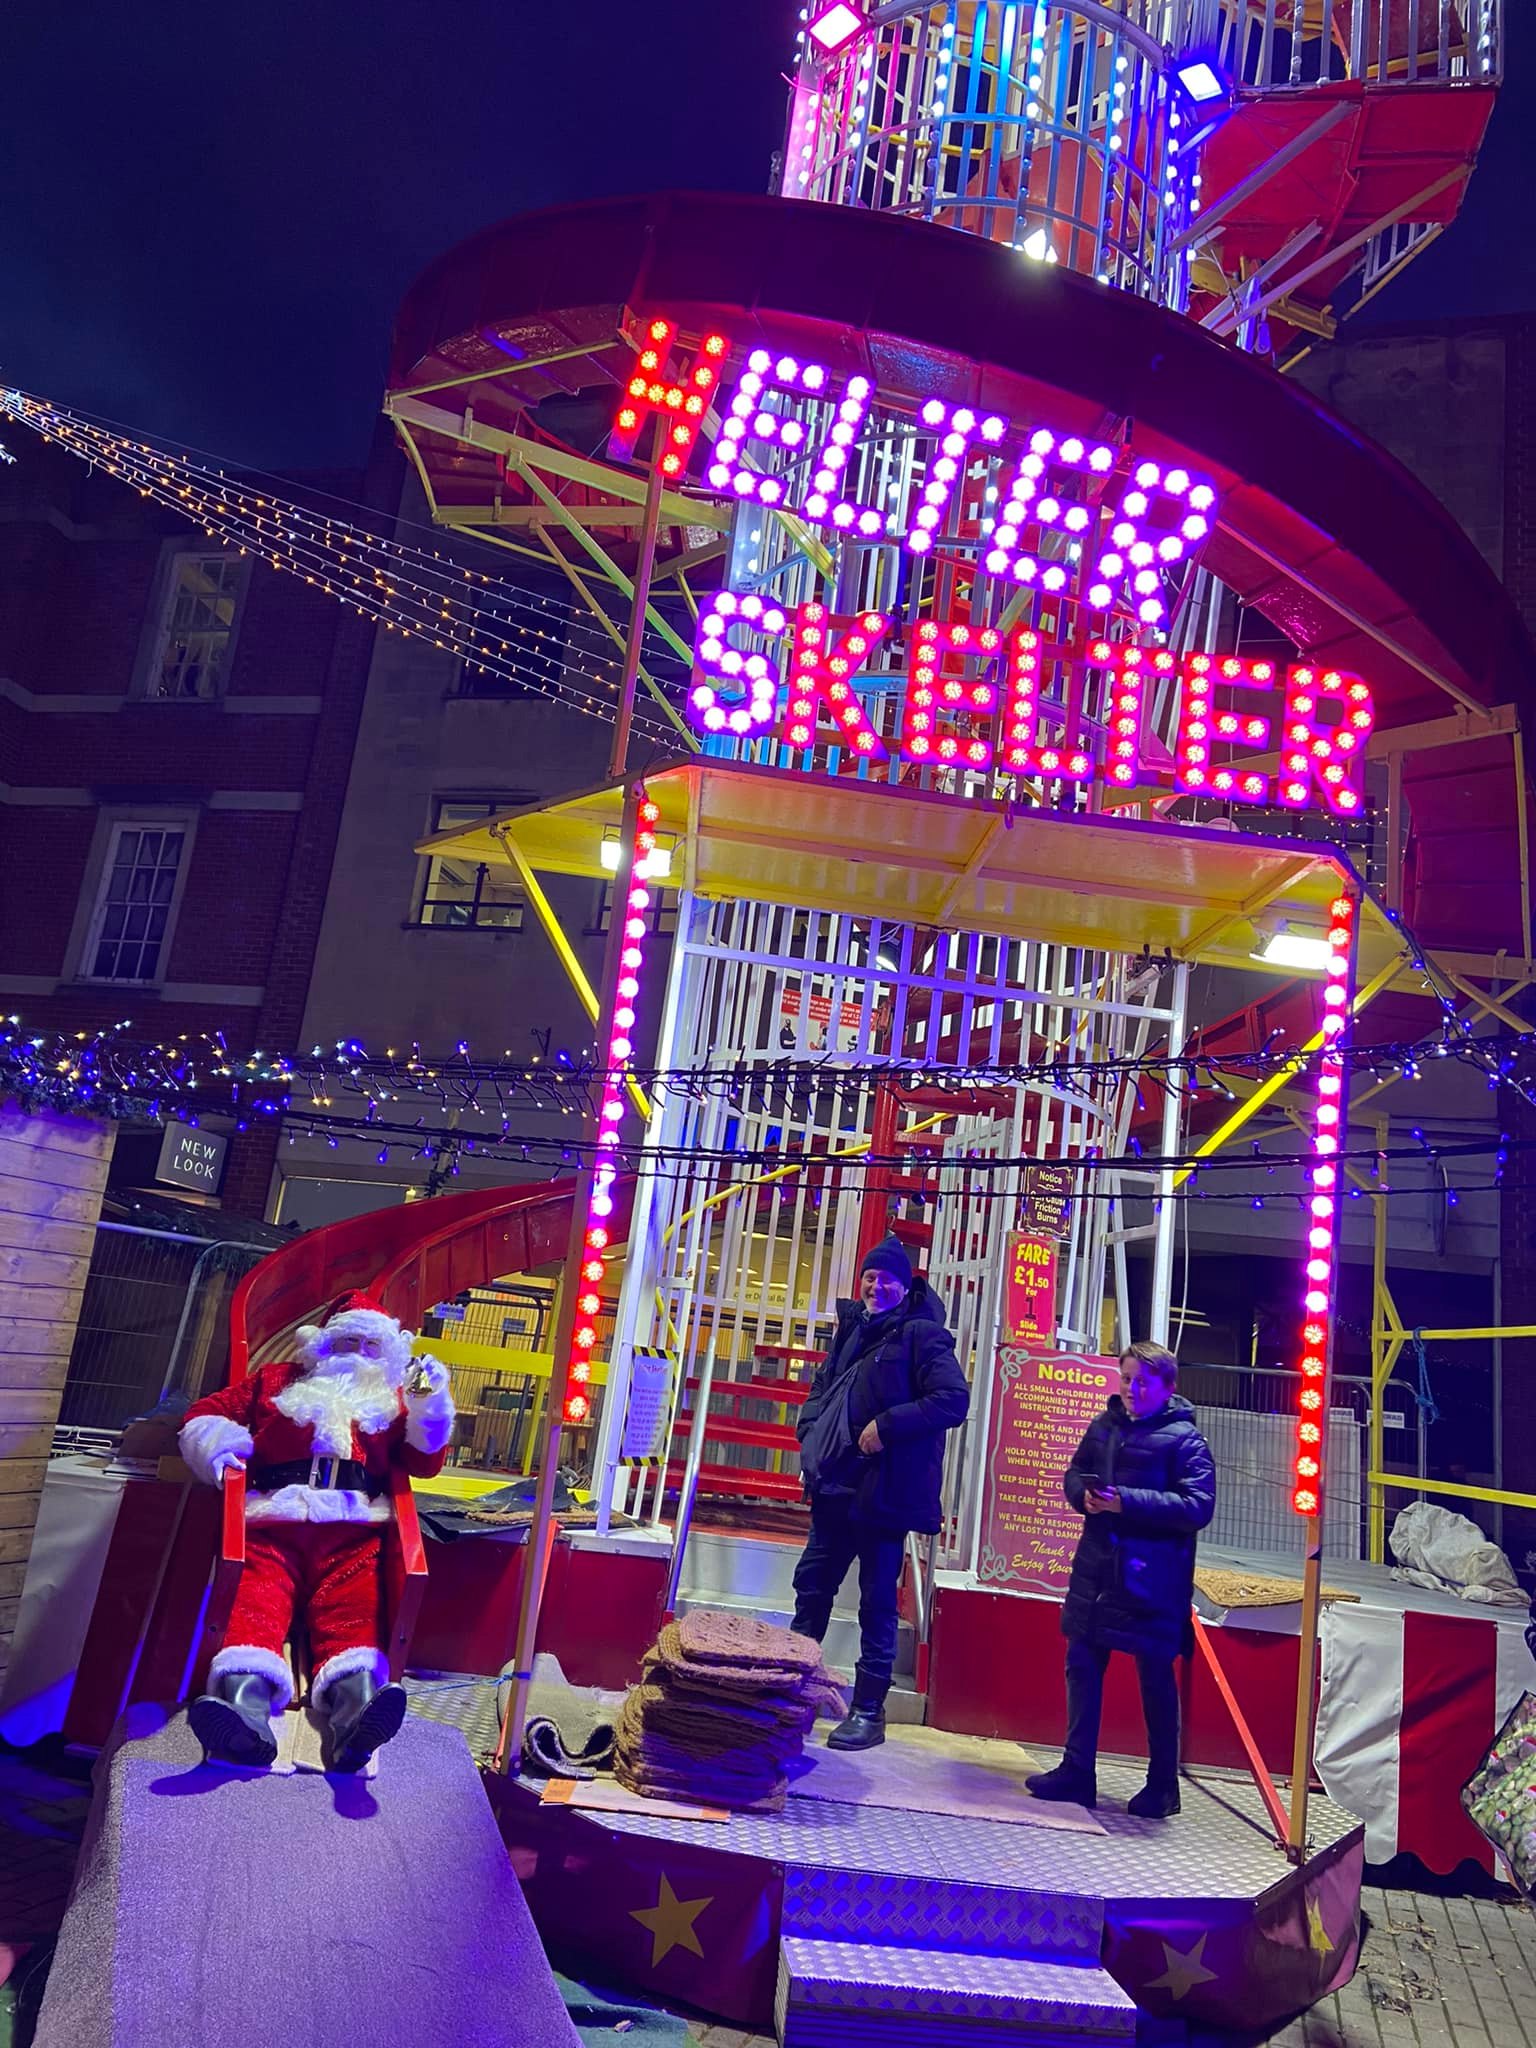 A photo of a Helter Skelter ride